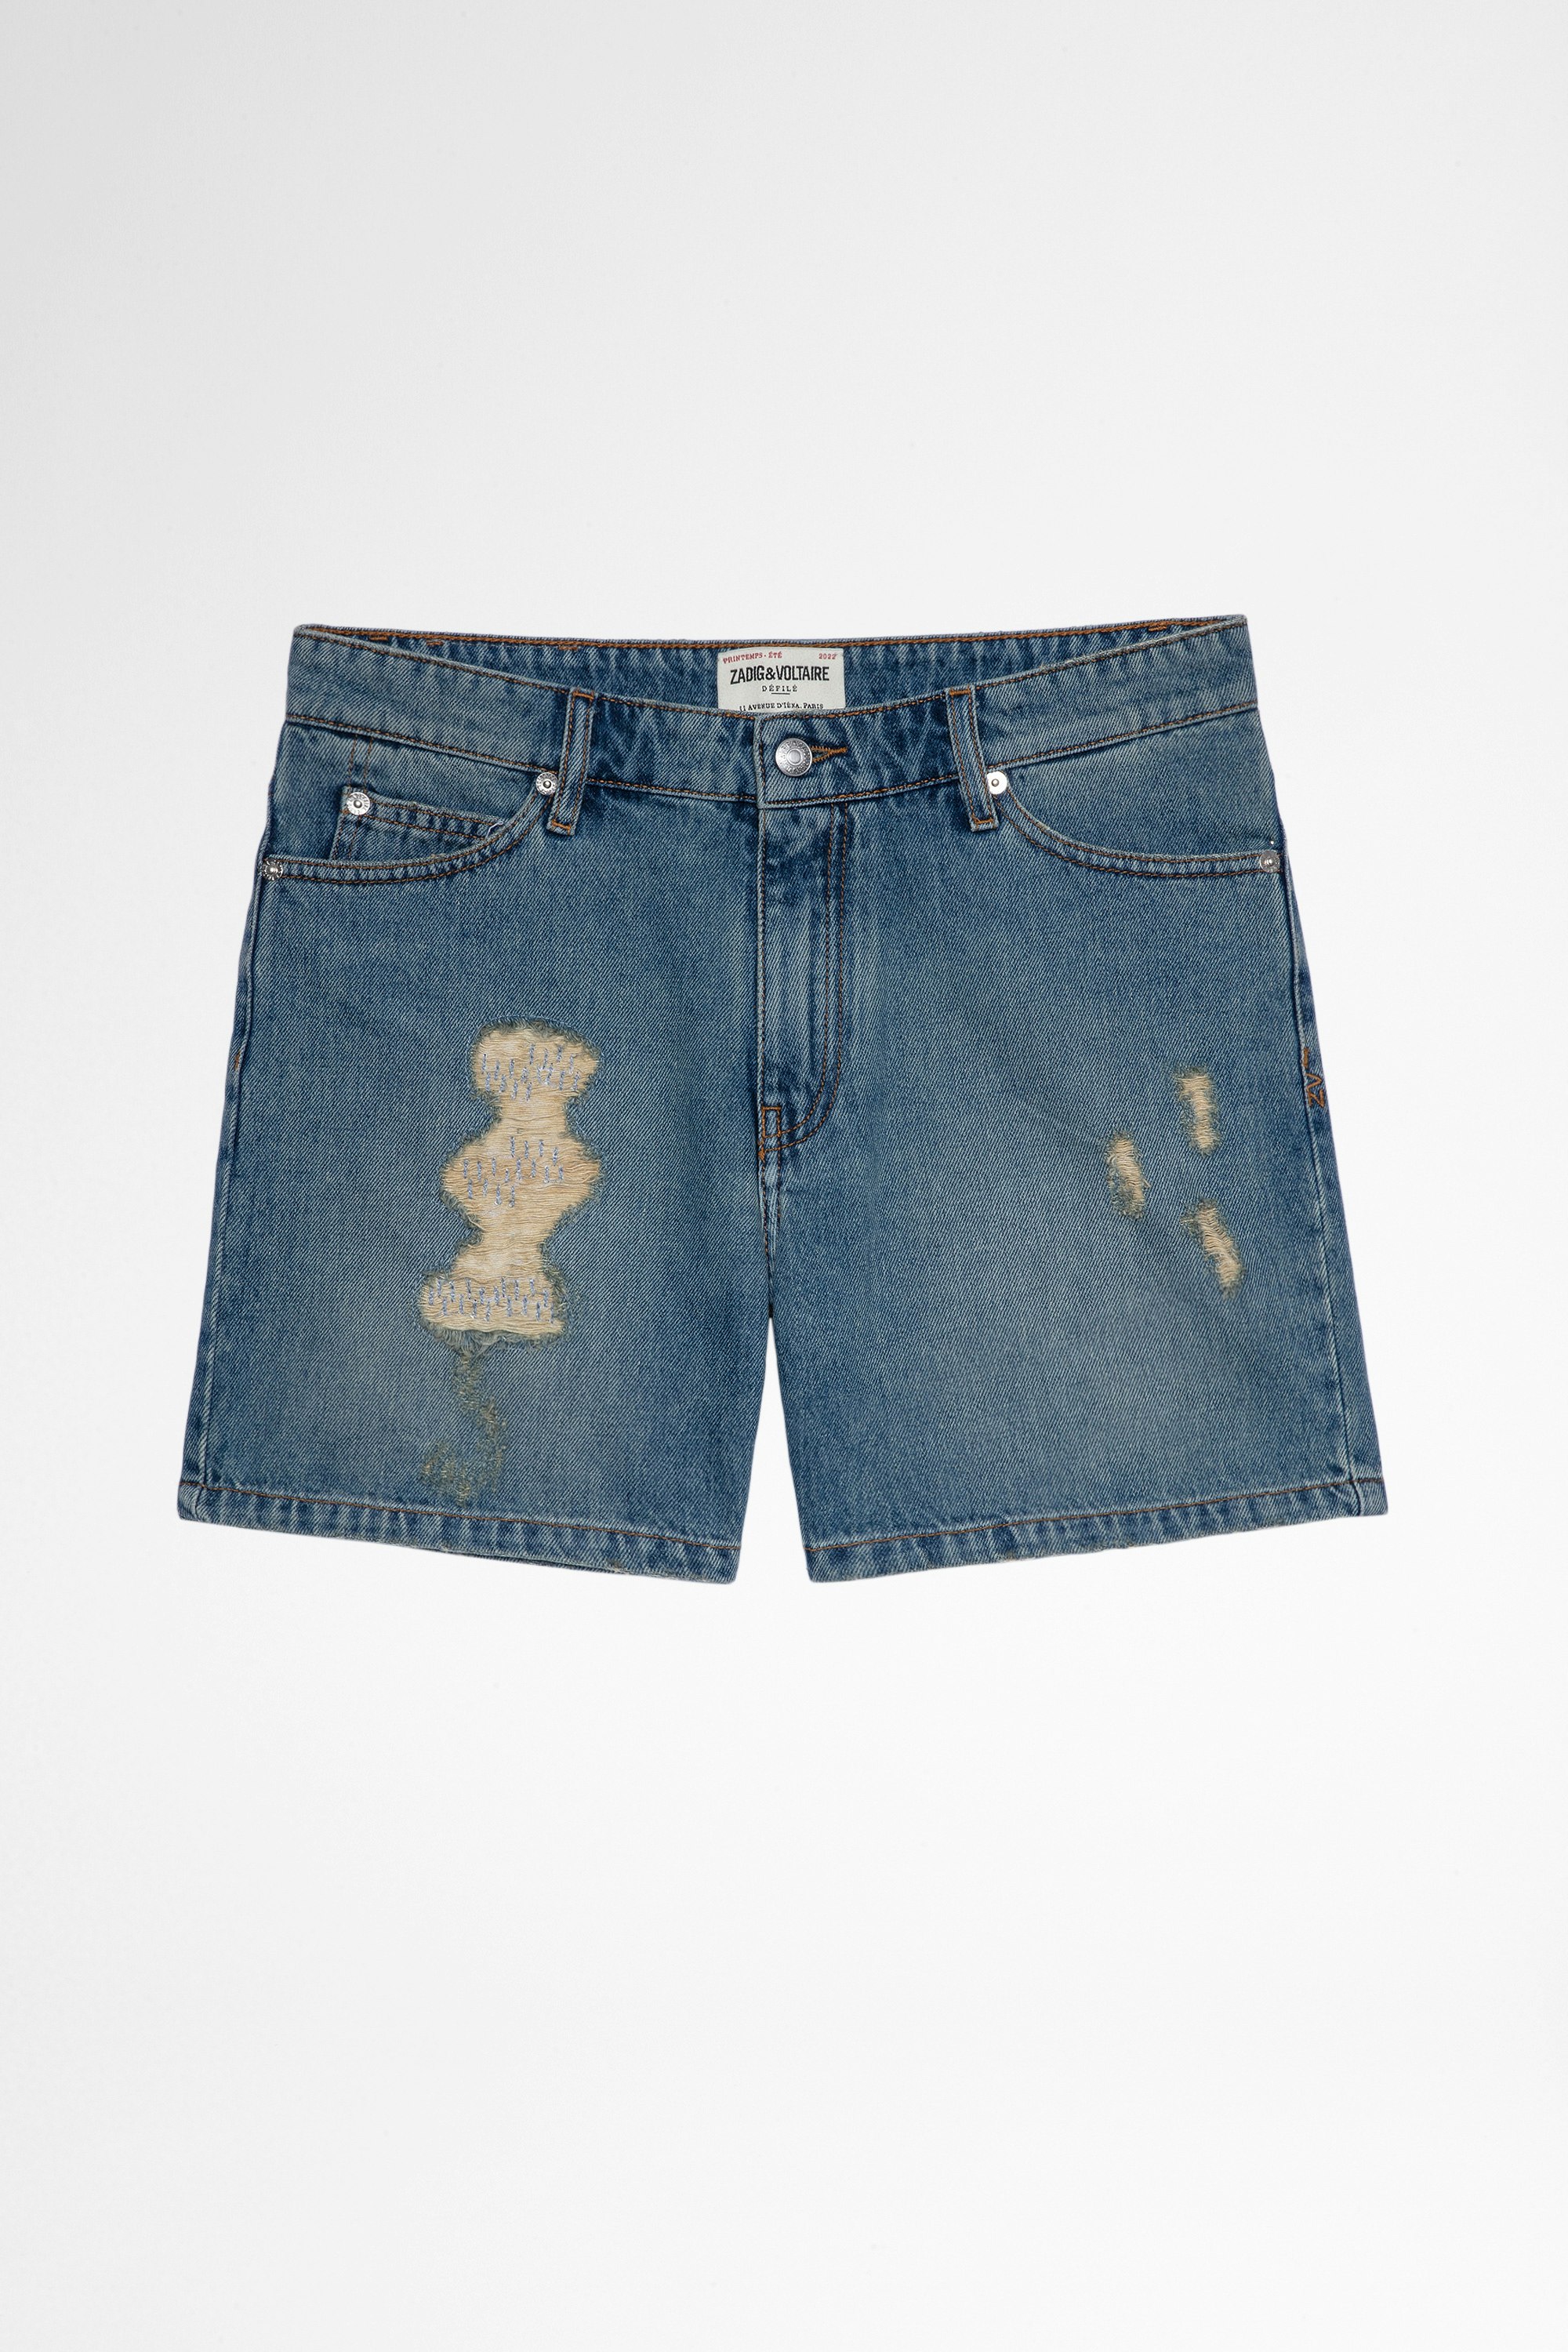 Tomboy Shorts Women's faded blue denim shorts. Made with fibers from organic farming.